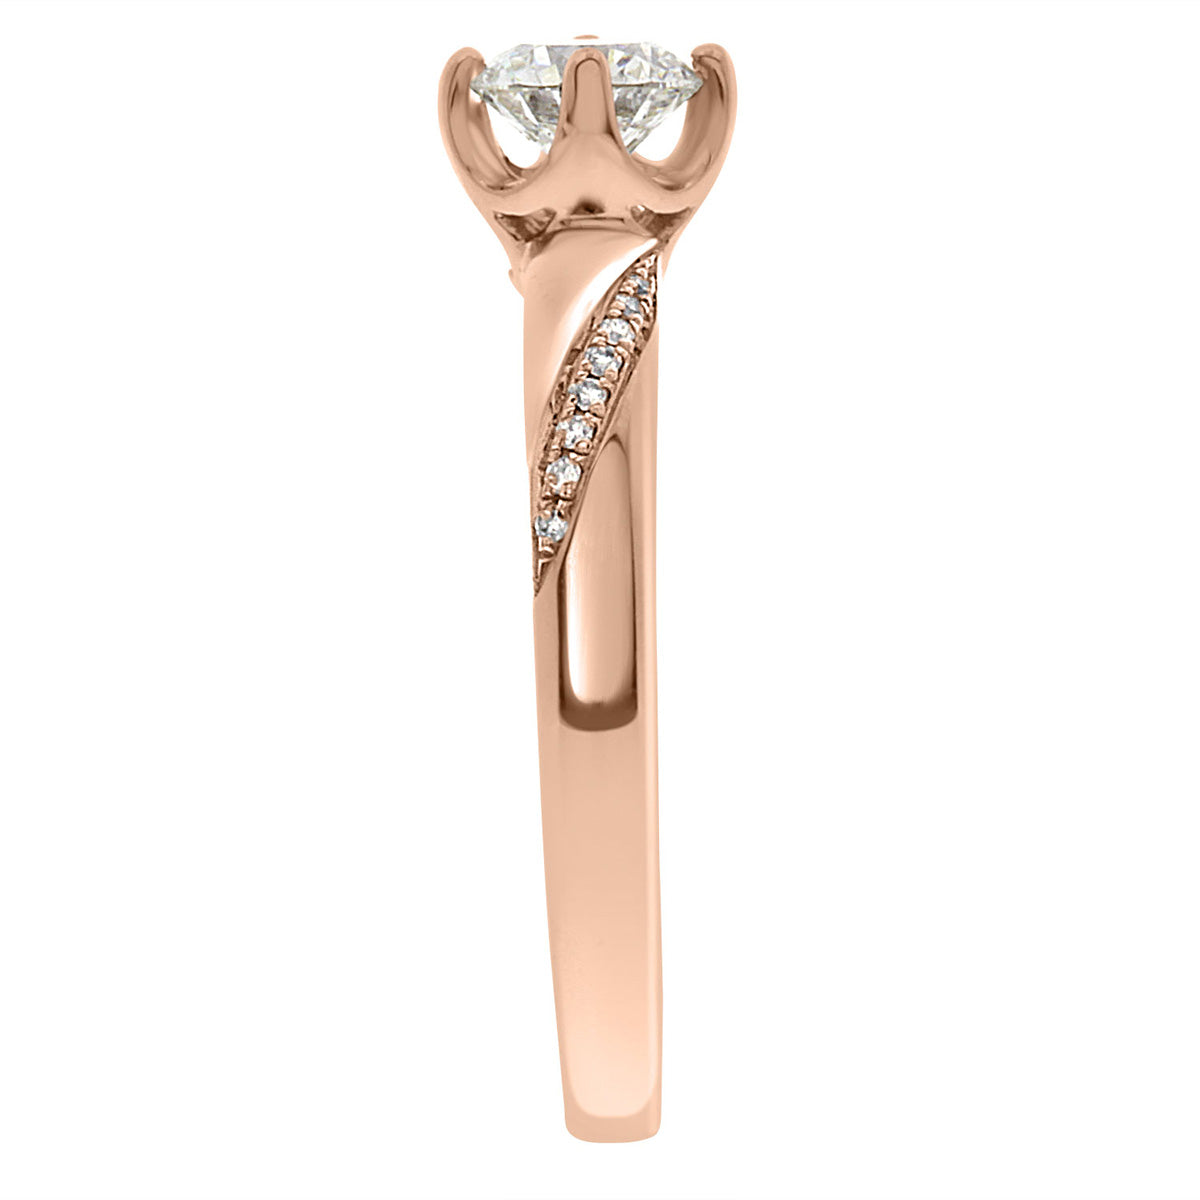 Crossover Band Engagement Ring made from rose gold pictured from the side standing vertical